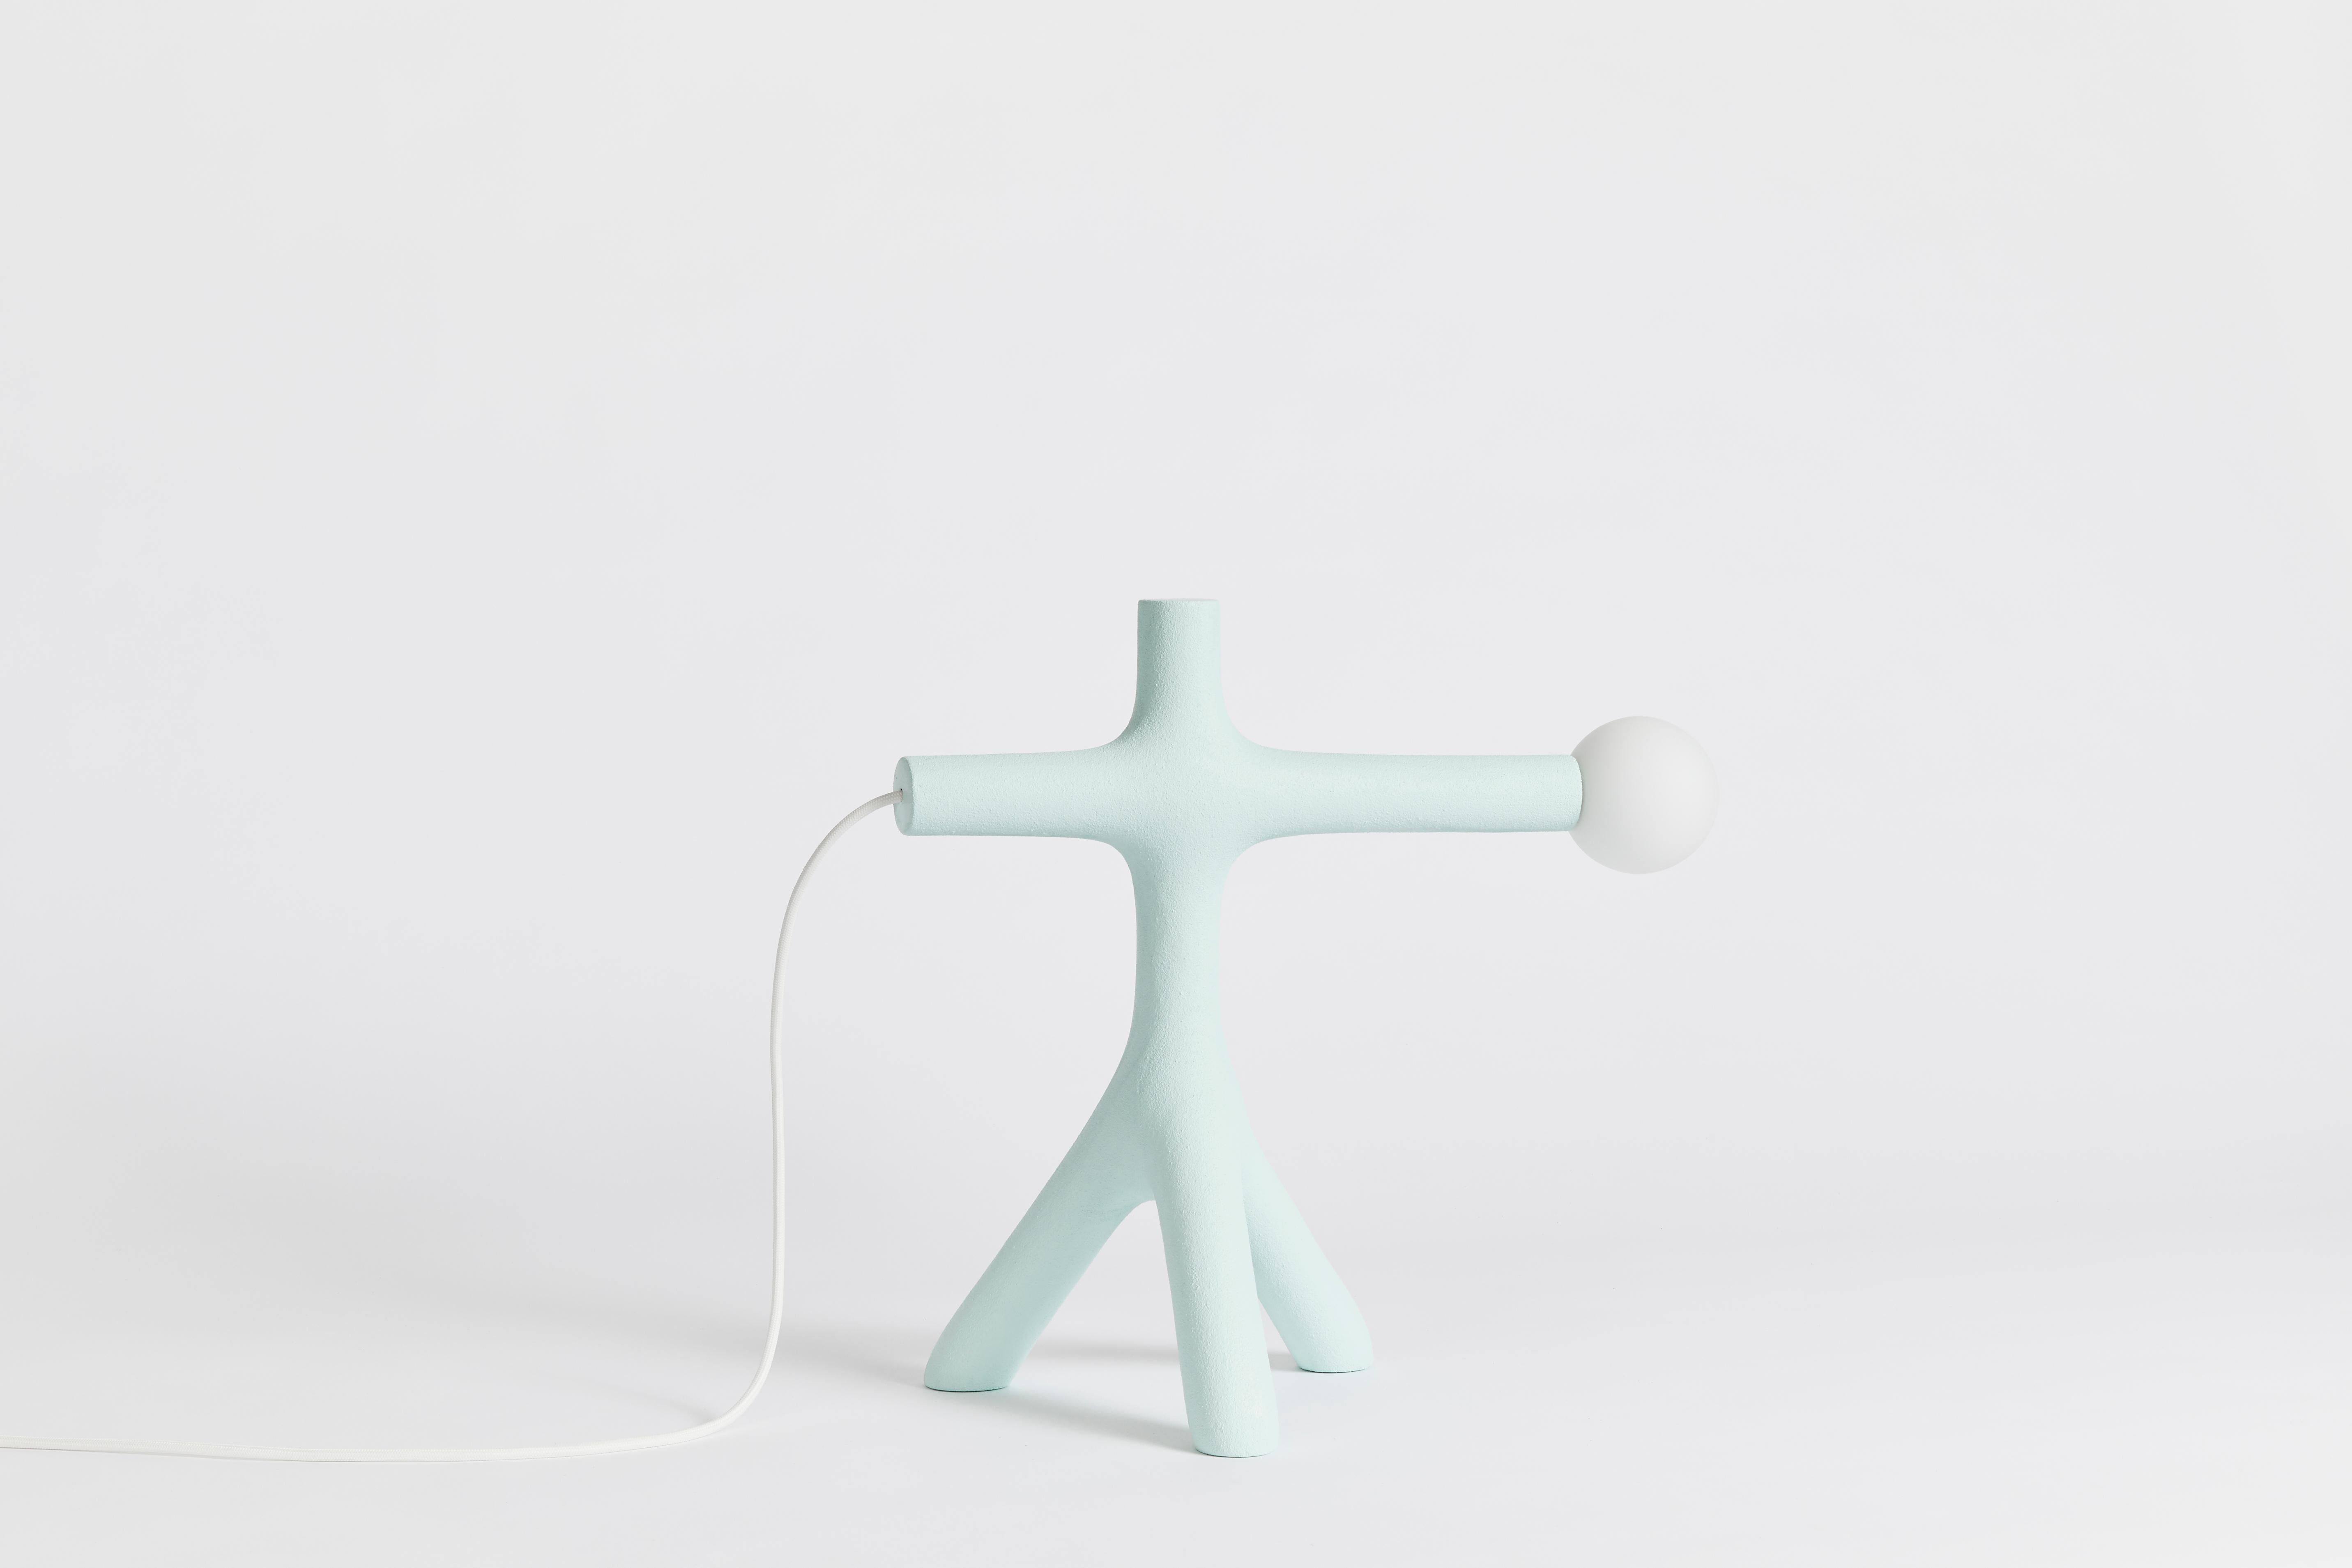 Play object desk light 03 by Hot Wire Extensions
Limited edition
Materials: Waste SLS 3D nylon powder, Sand from sustainable sources
Dimensions: H 45 x W 47 x D 25 cm 
Colour: Anthracite, aqua, cream, lemon, pink and grey
Finish: Matte, sealed